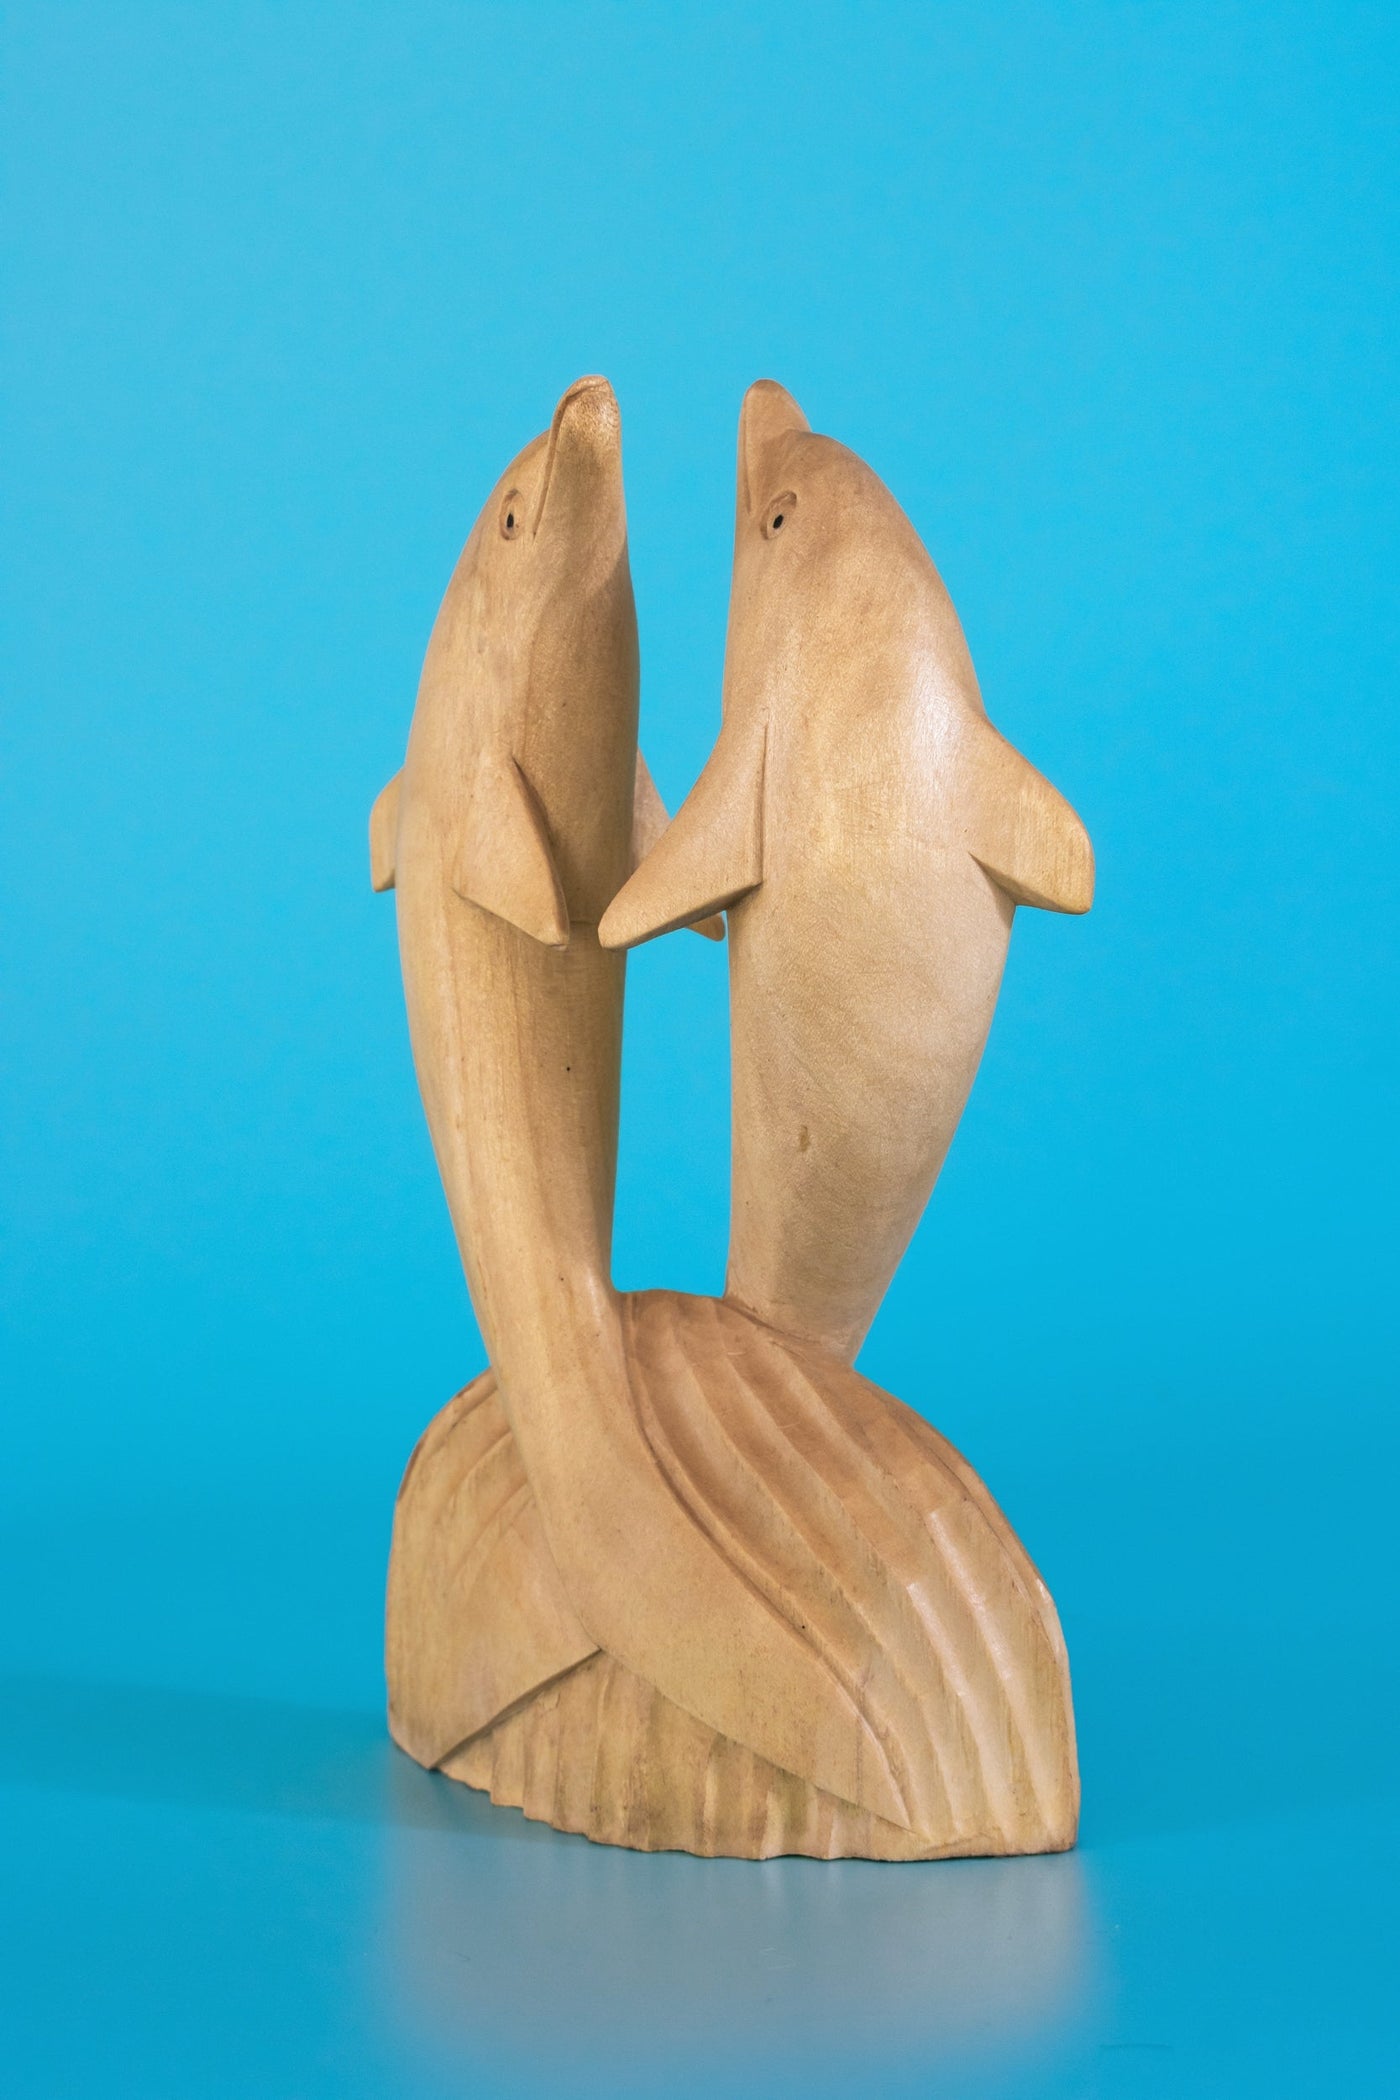 Wooden Hand Carved 2 Jumping Dolphin Statue Sculpture Wood Decor Accent Fish Figurine Handcrafted Handmade Seaside Tropical Nautical Ocean Coastal